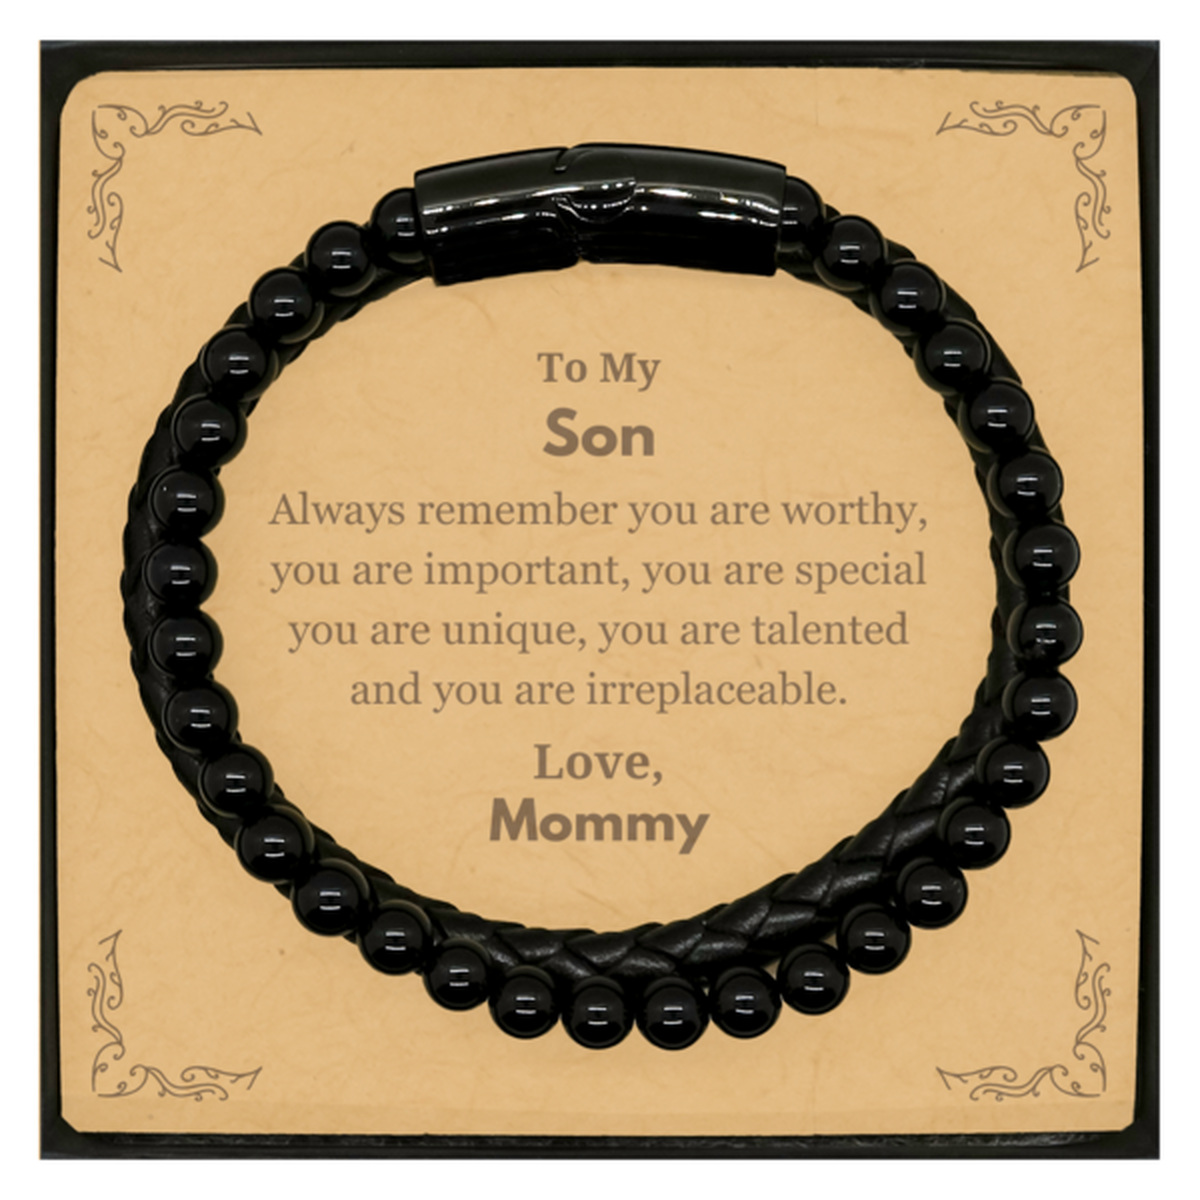 Son Birthday Gifts from Mommy, Inspirational Stone Leather Bracelets for Son Christmas Graduation Gifts for Son Always remember you are worthy, you are important. Love, Mommy